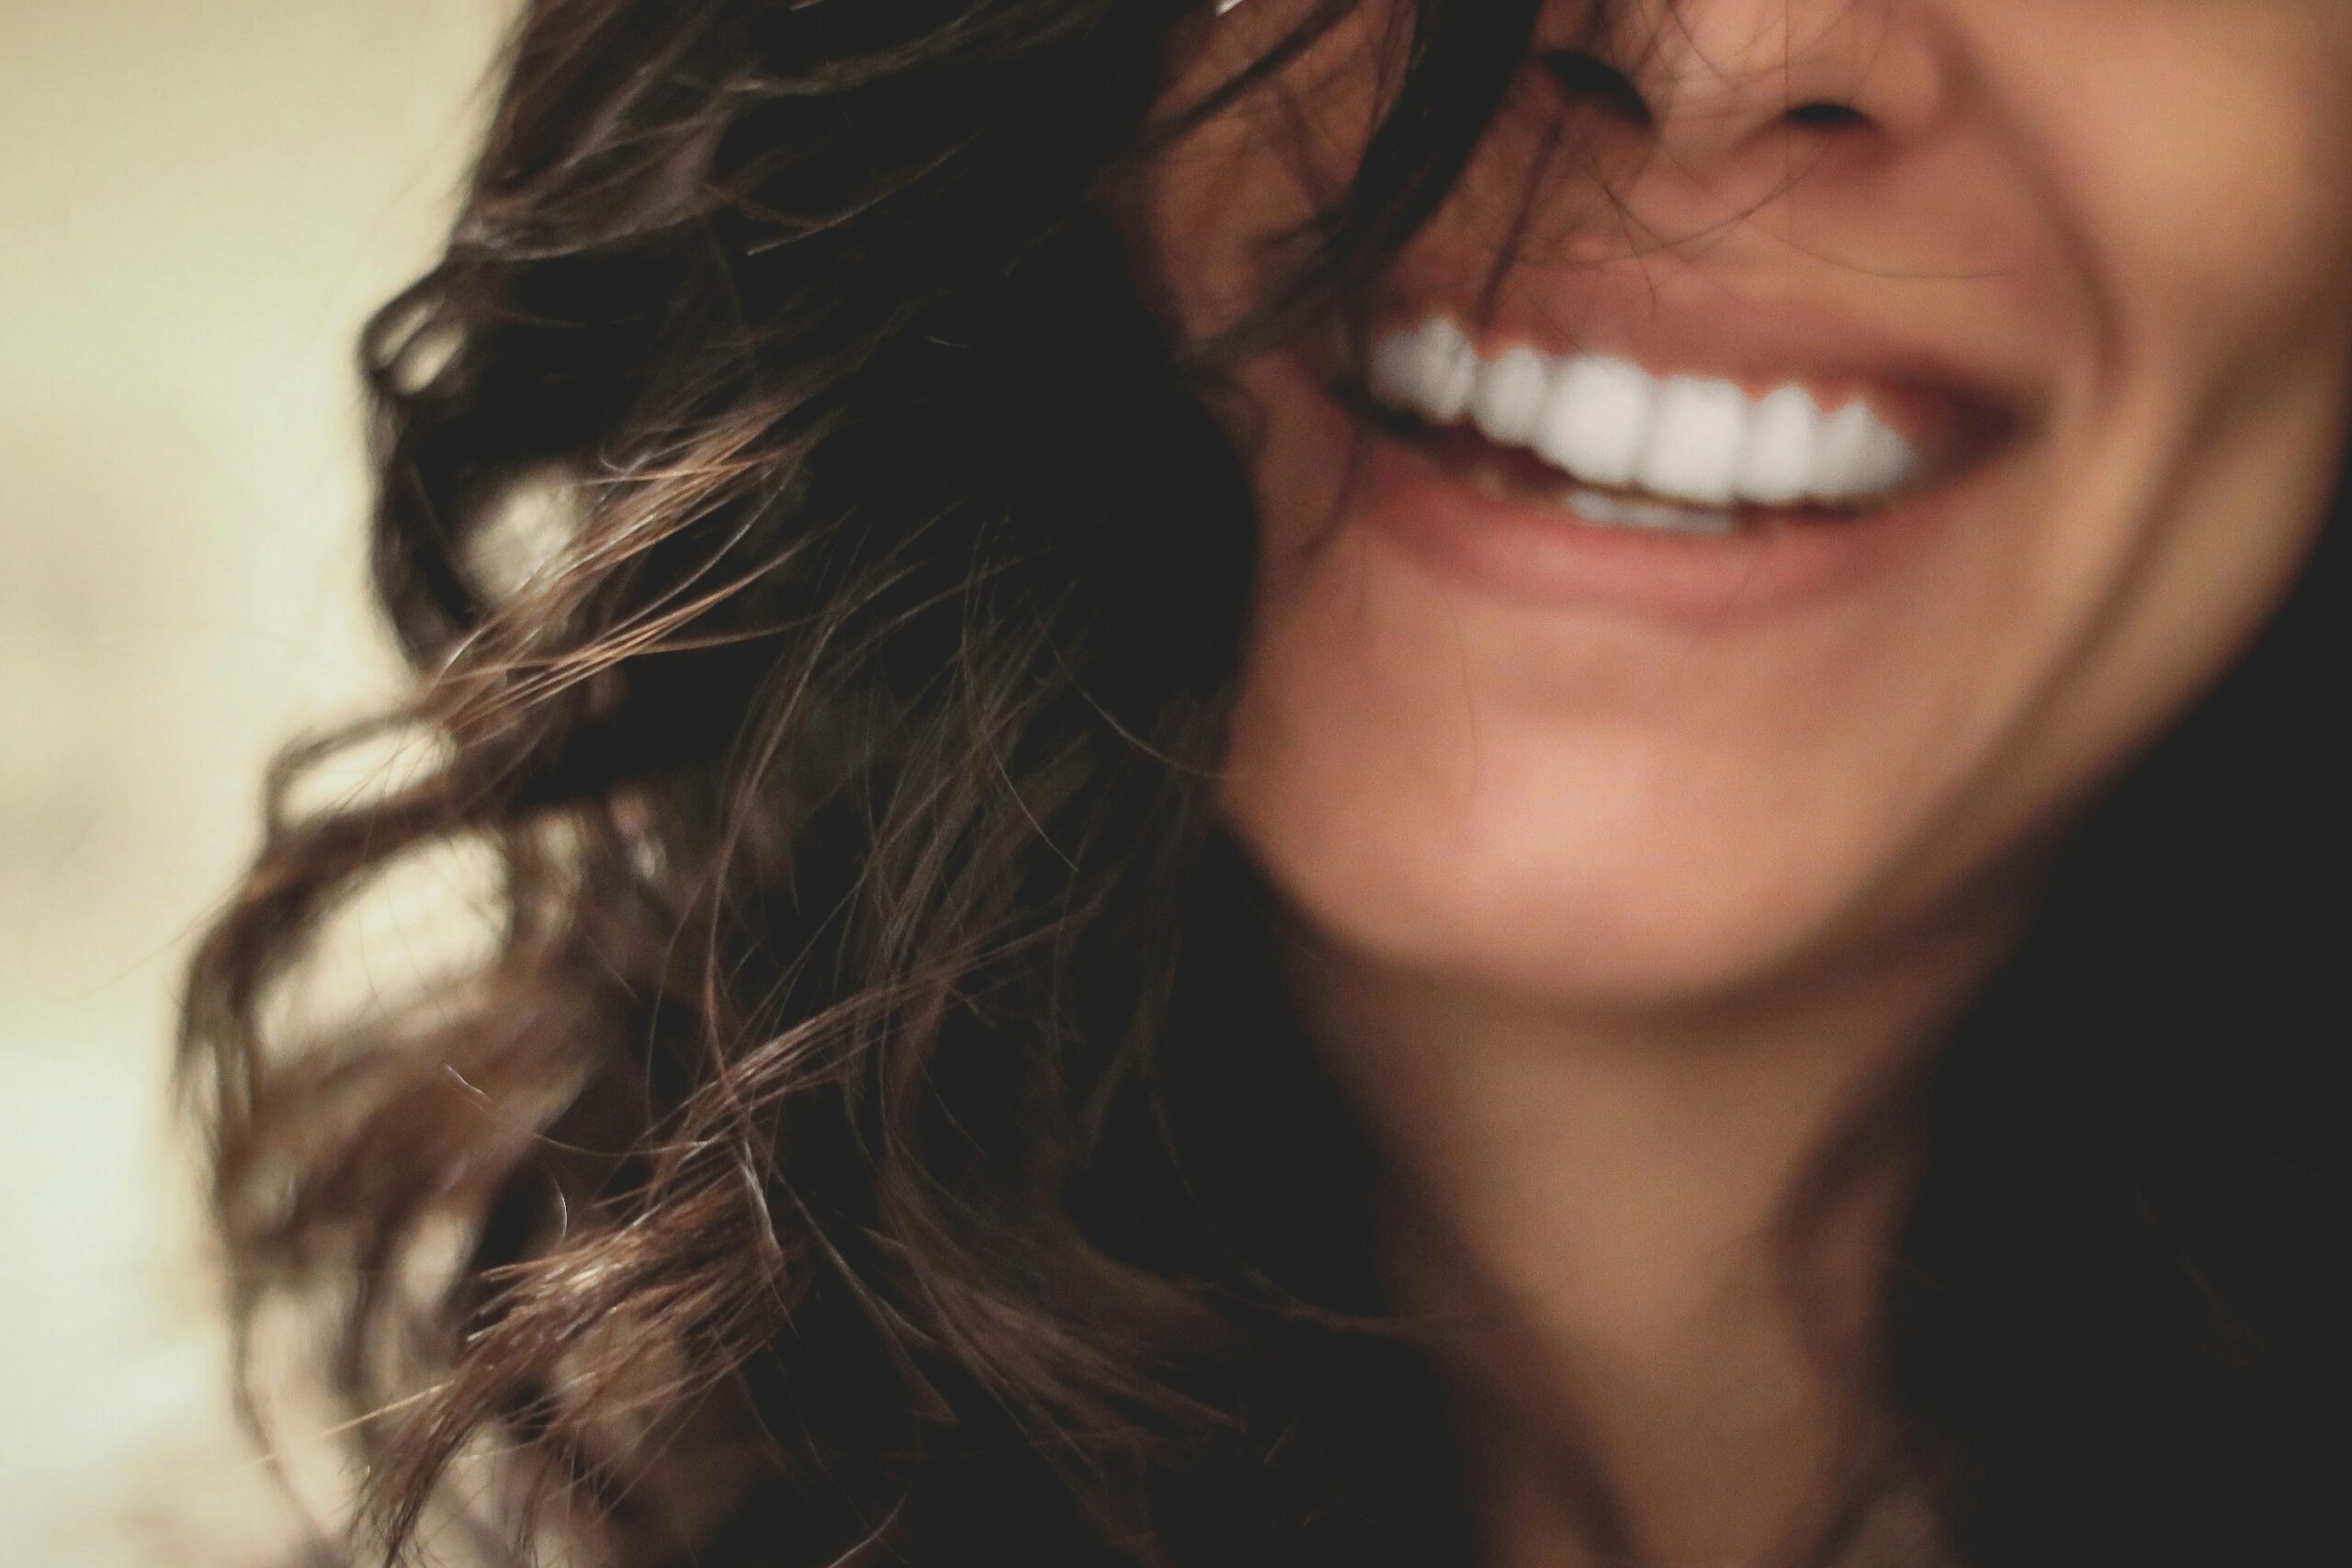 A zoomed in pictre of a woman smiling.